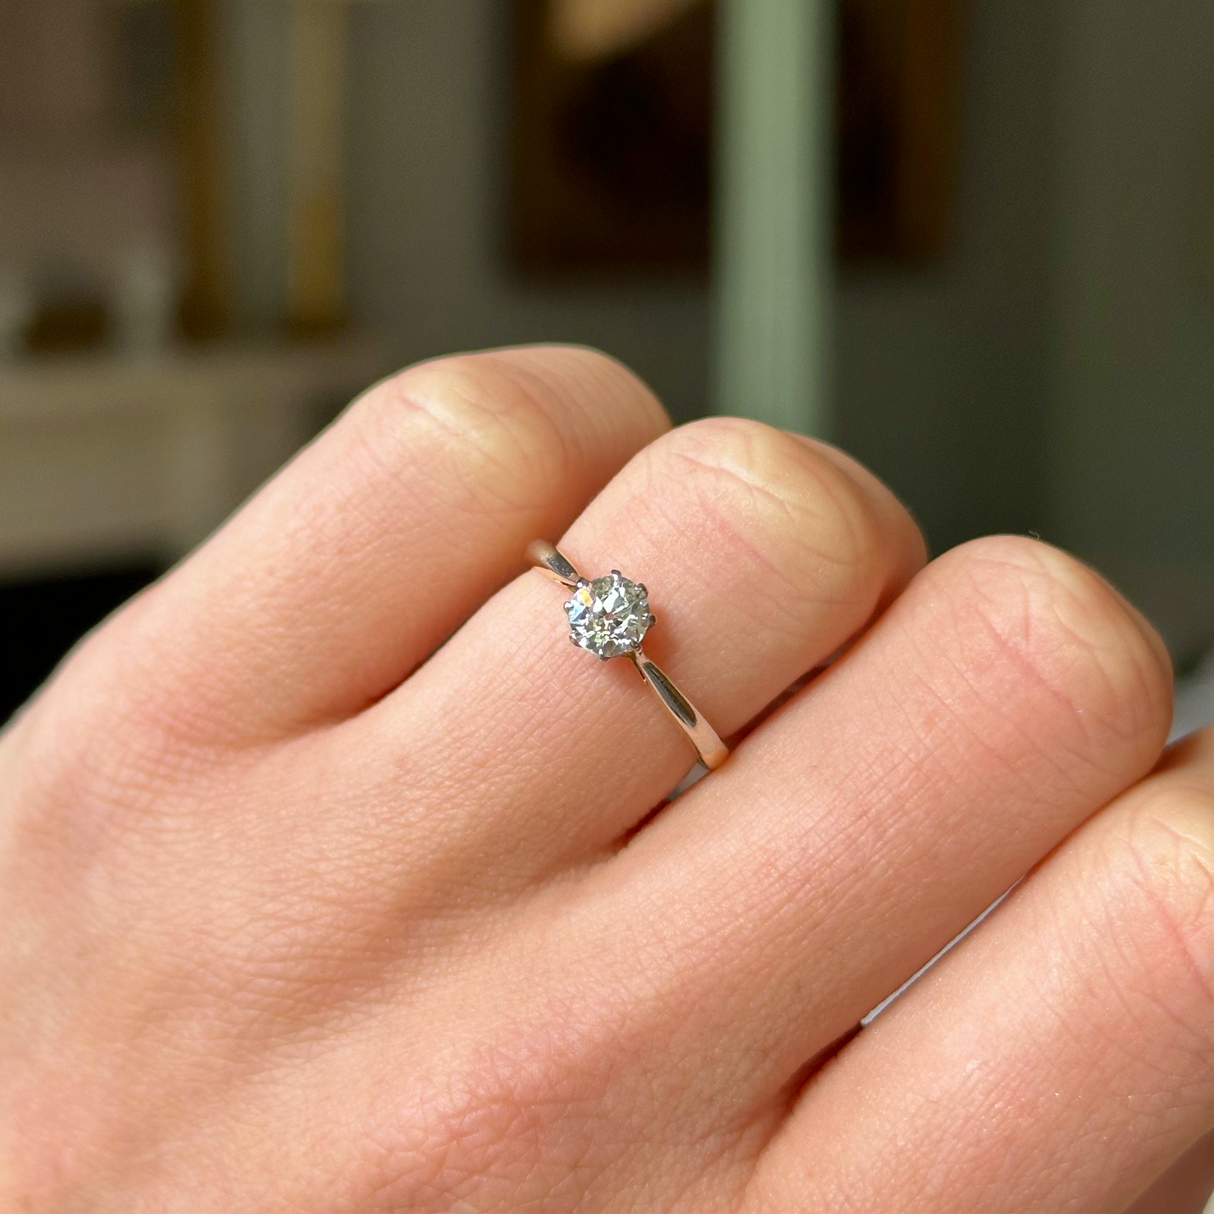 Vintage, 1930s Solitaire Diamond Engagement Ring, 18ct Yellow Gold and Platinum worn on hand.